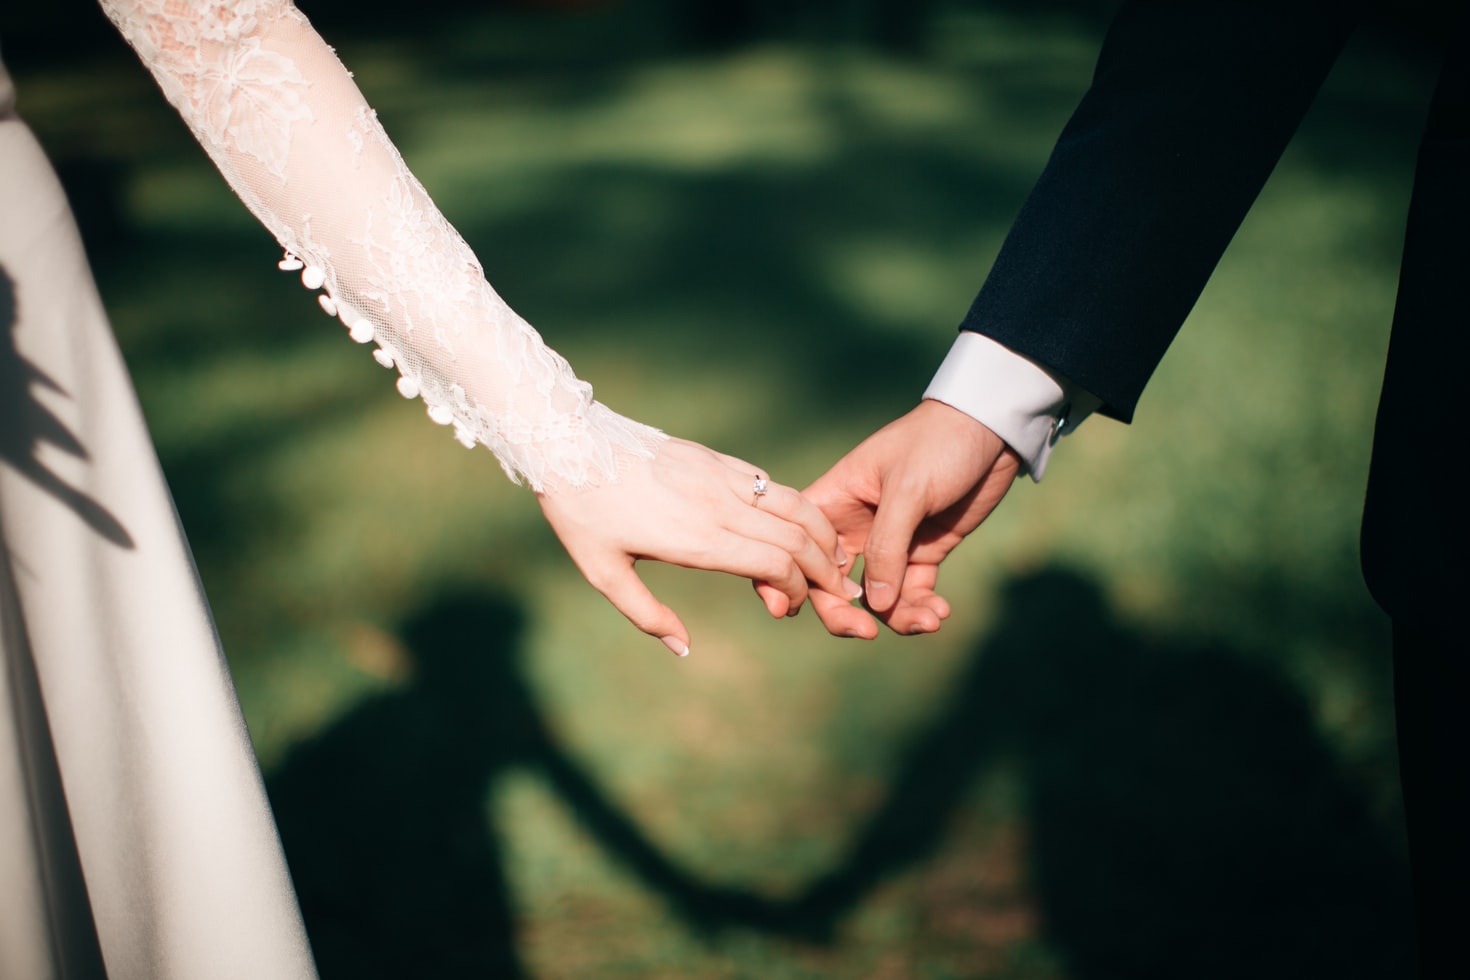 Newly Married? Make Sure You Check Off These 3 Tax Tasks